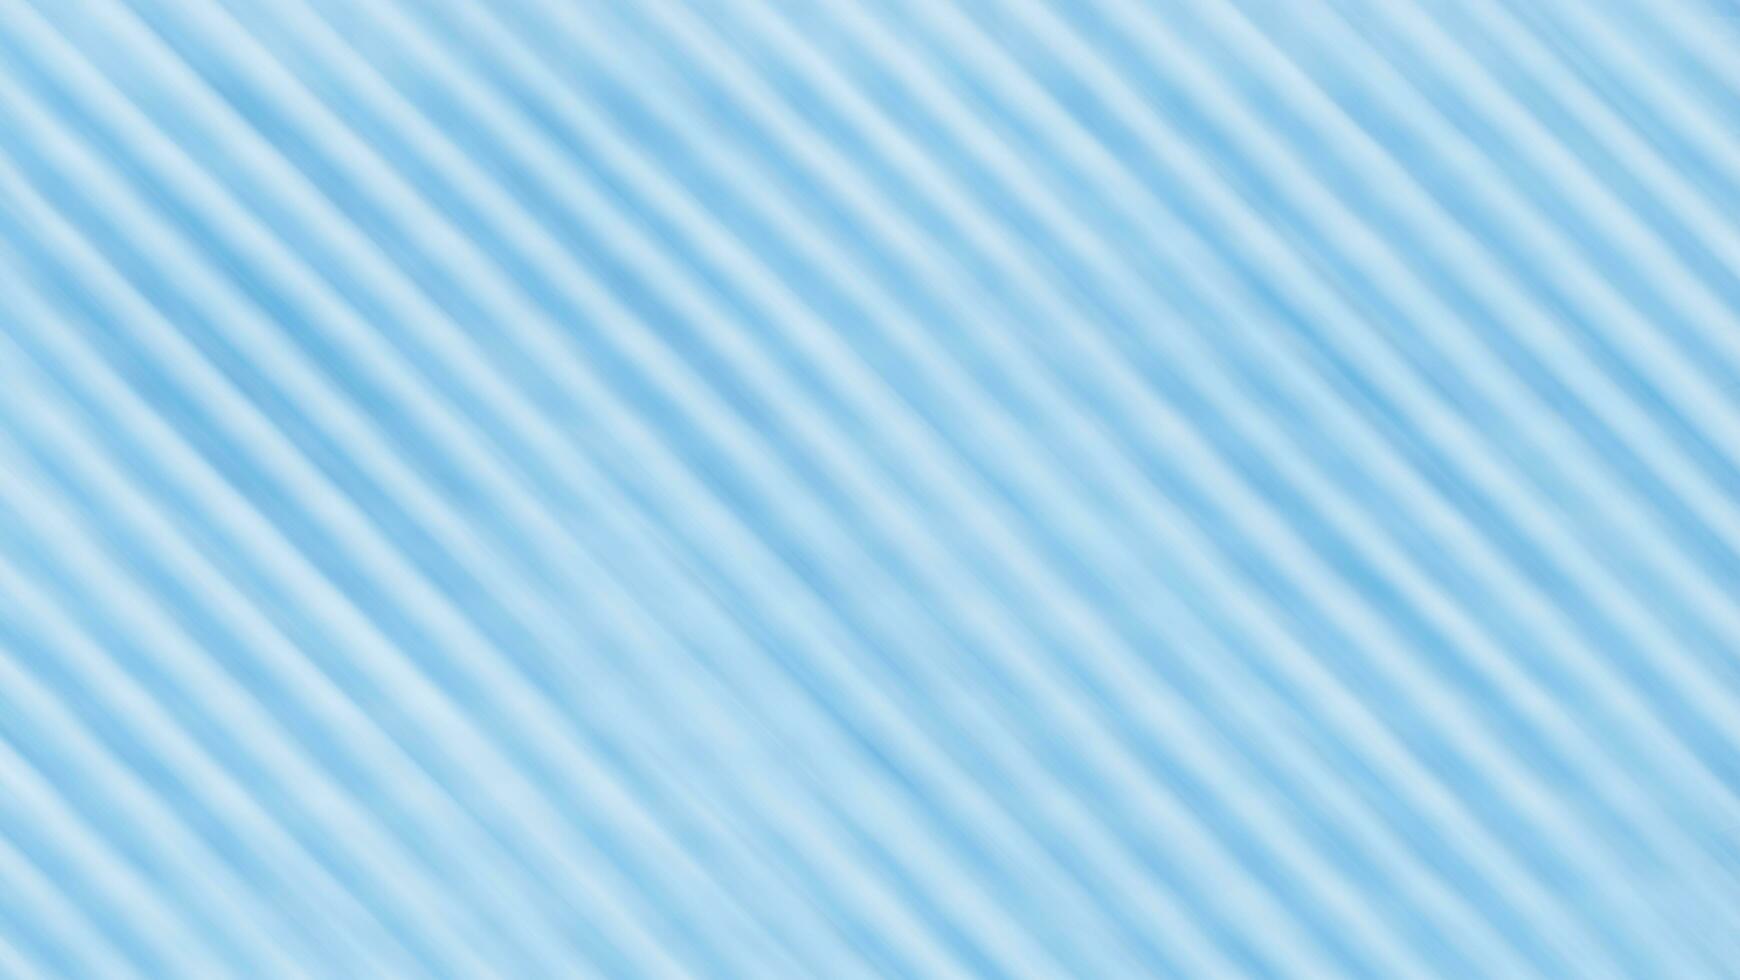 a blue background with a diagonal line pattern photo